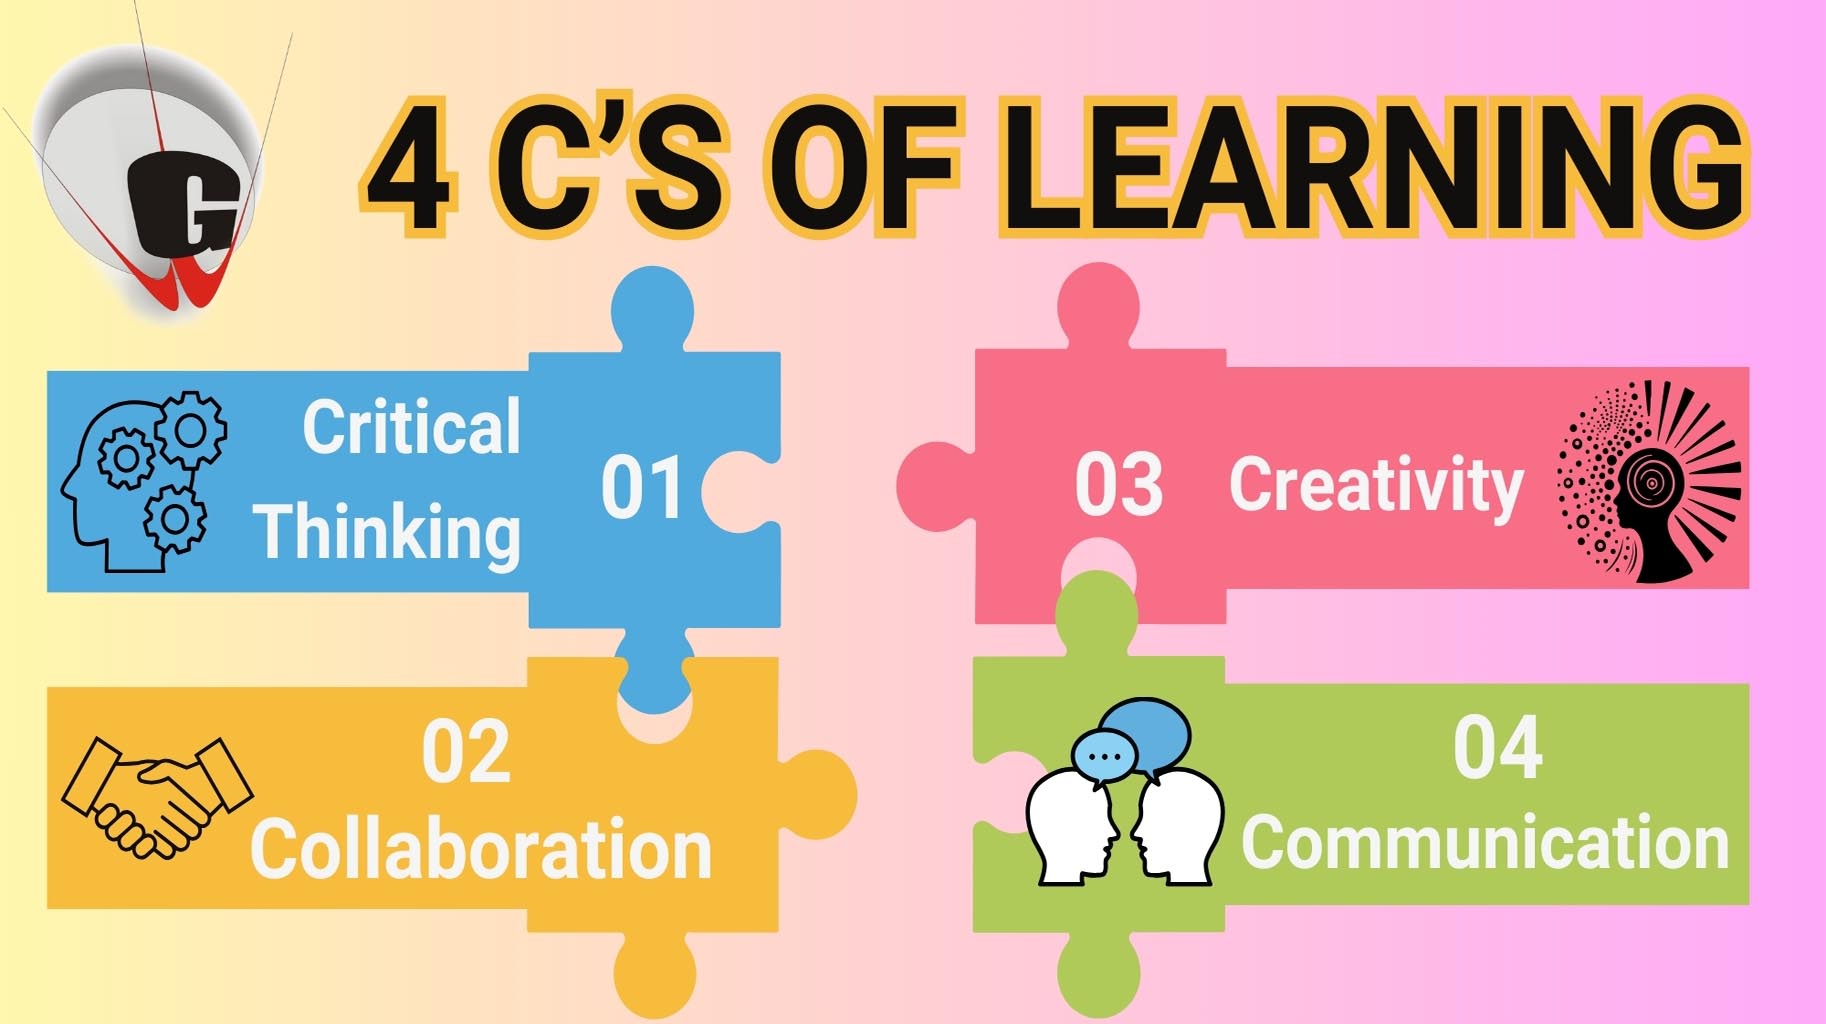 What are 4 c’s of learning